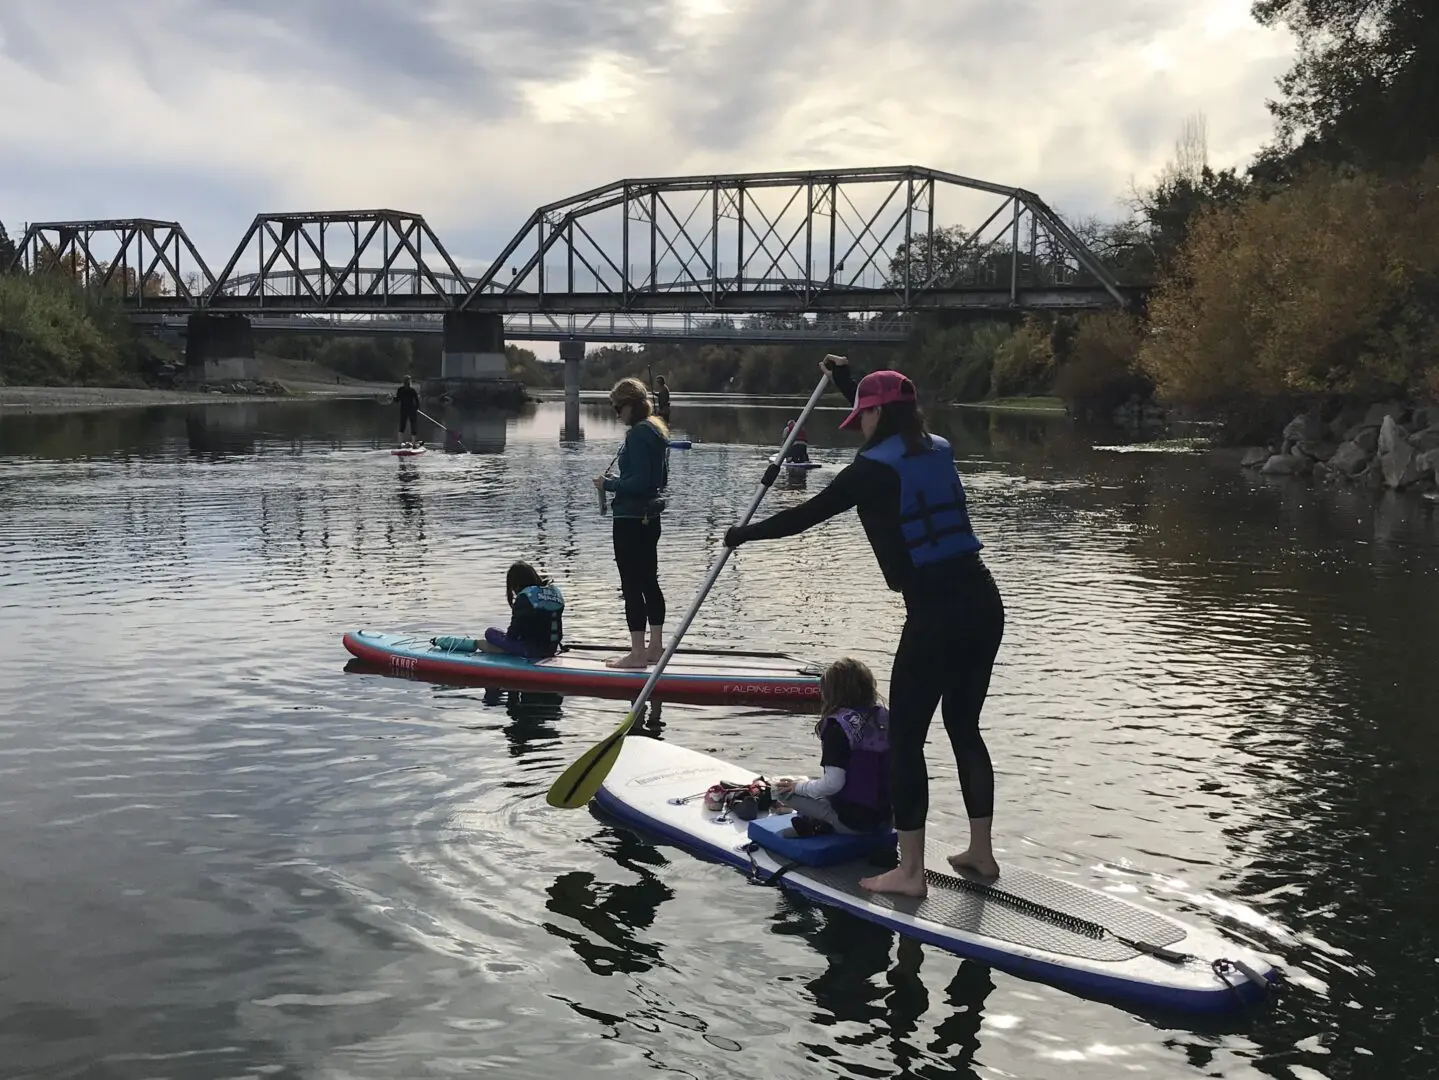 Two pairs of kids and adults paddleboarding